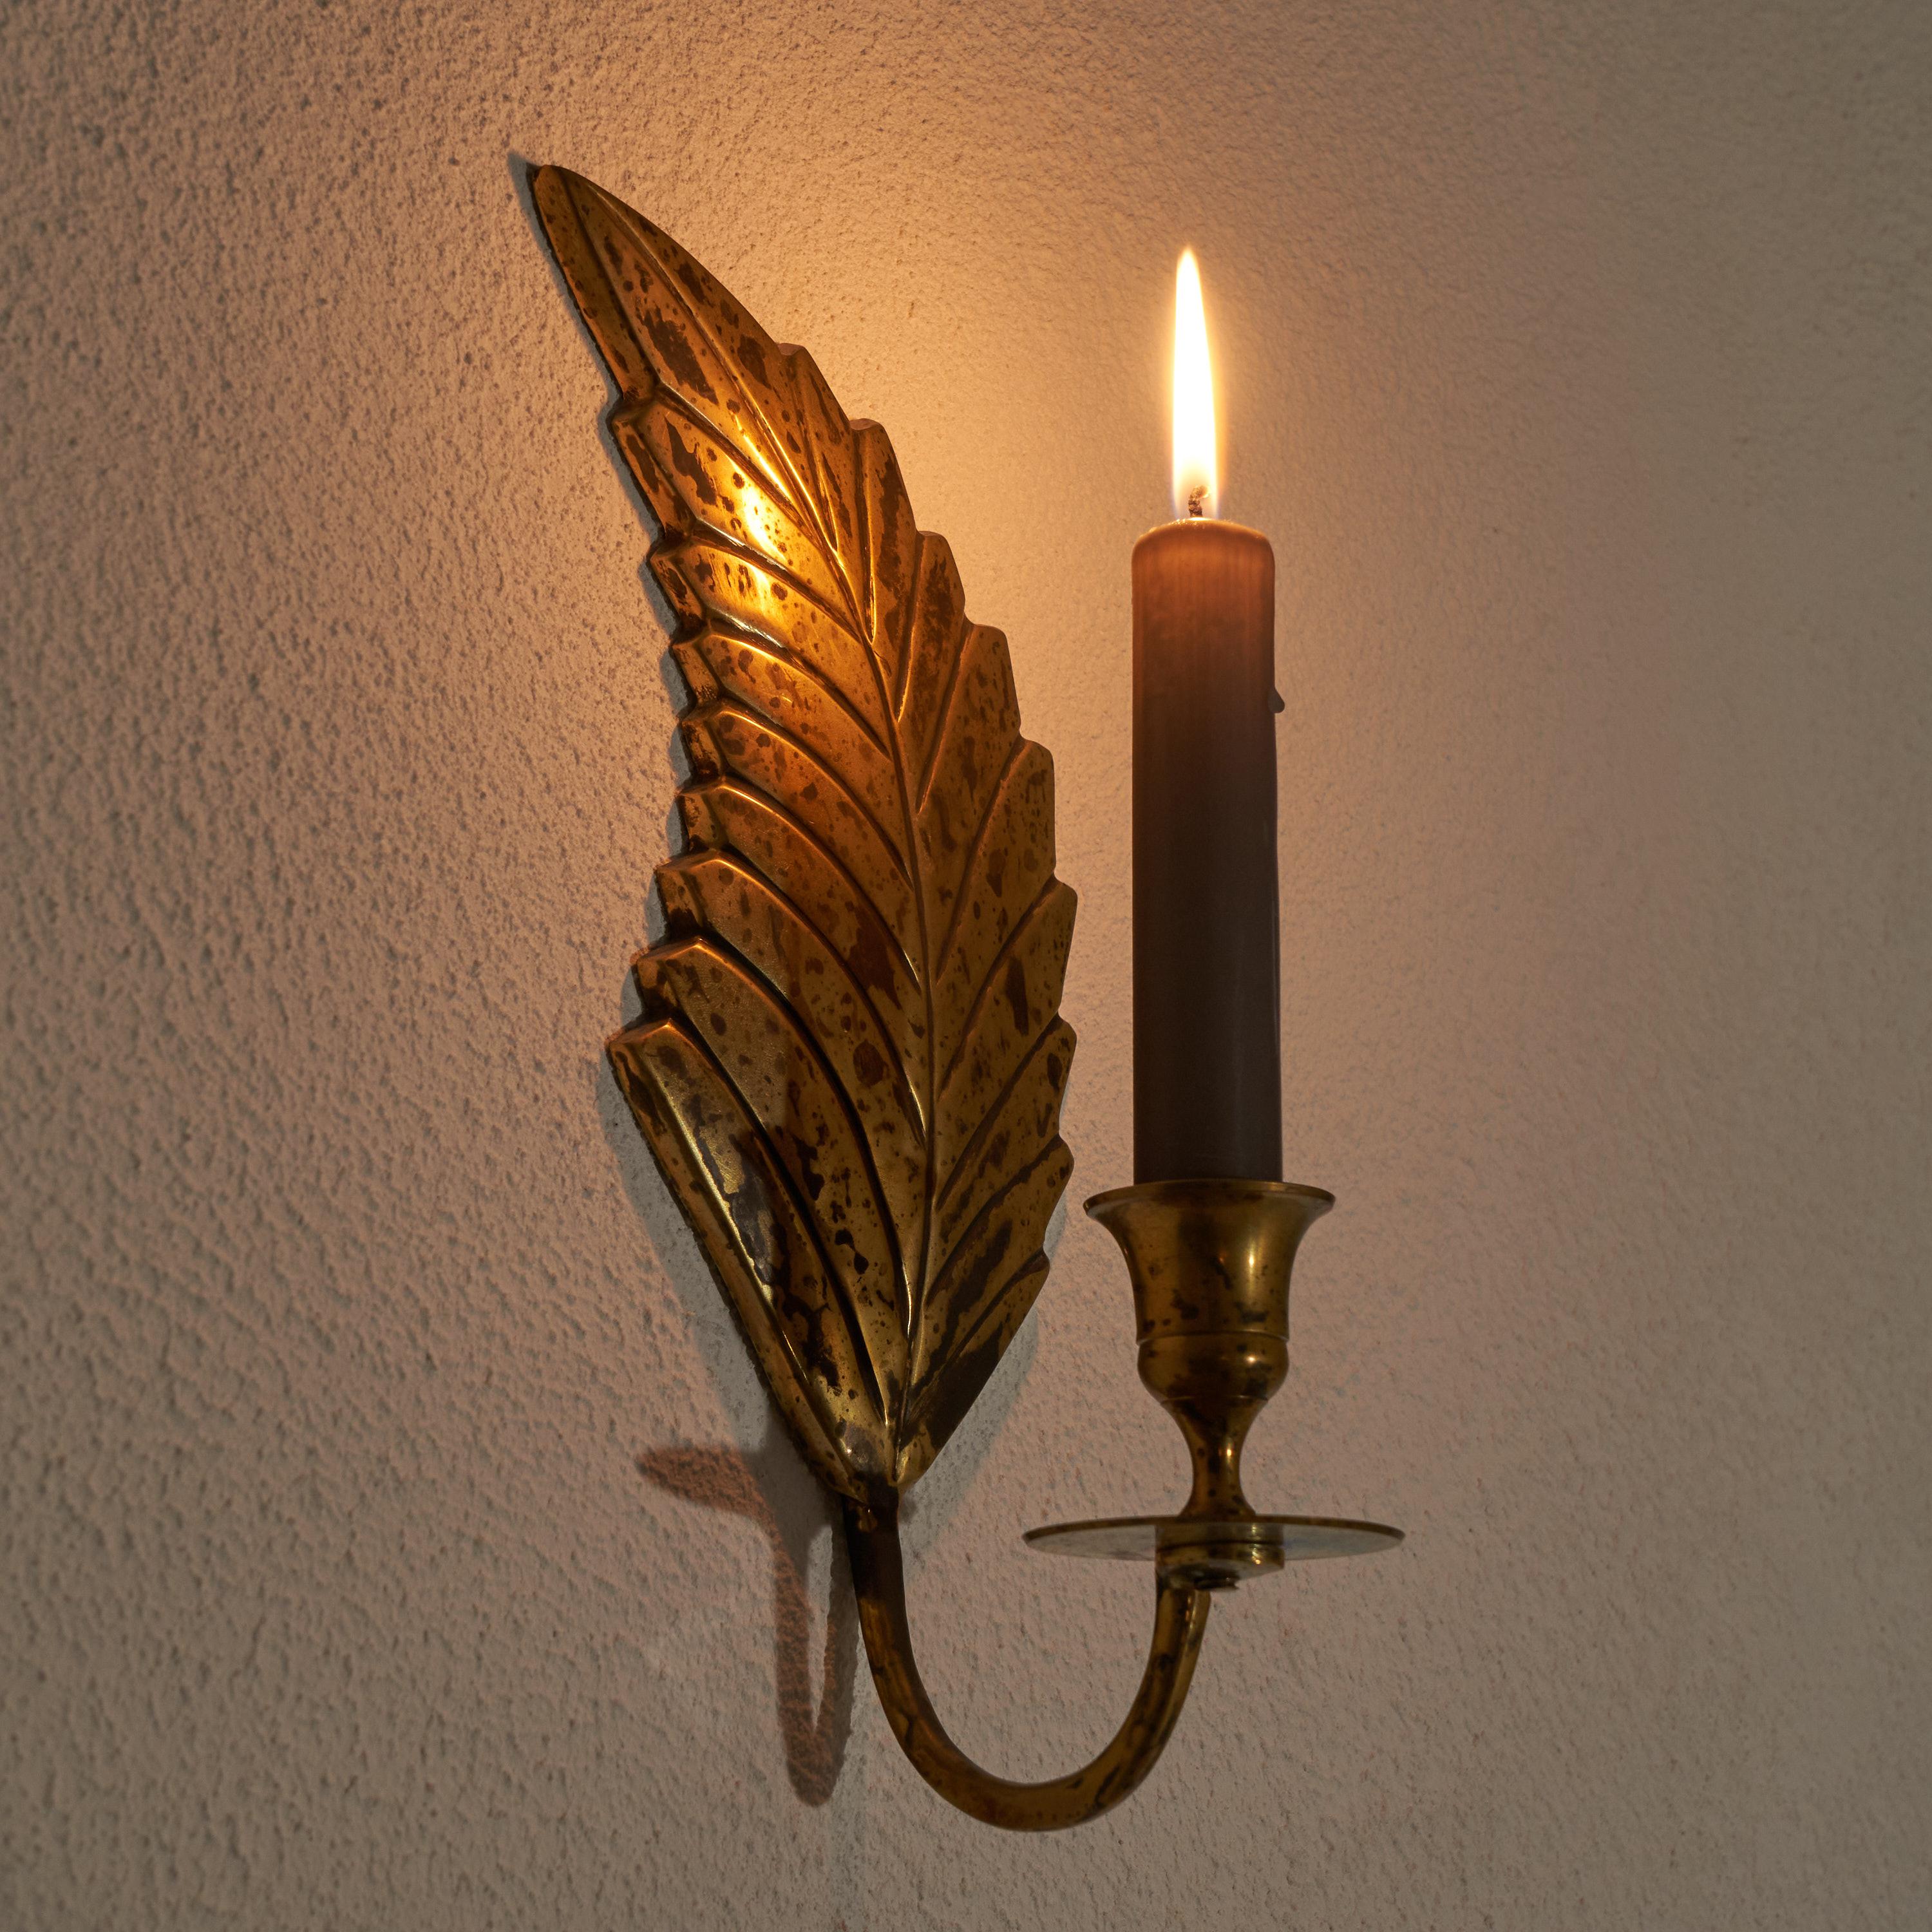 Unknown Leaf Shaped Candle Sconce in Patinated Brass 1970s For Sale